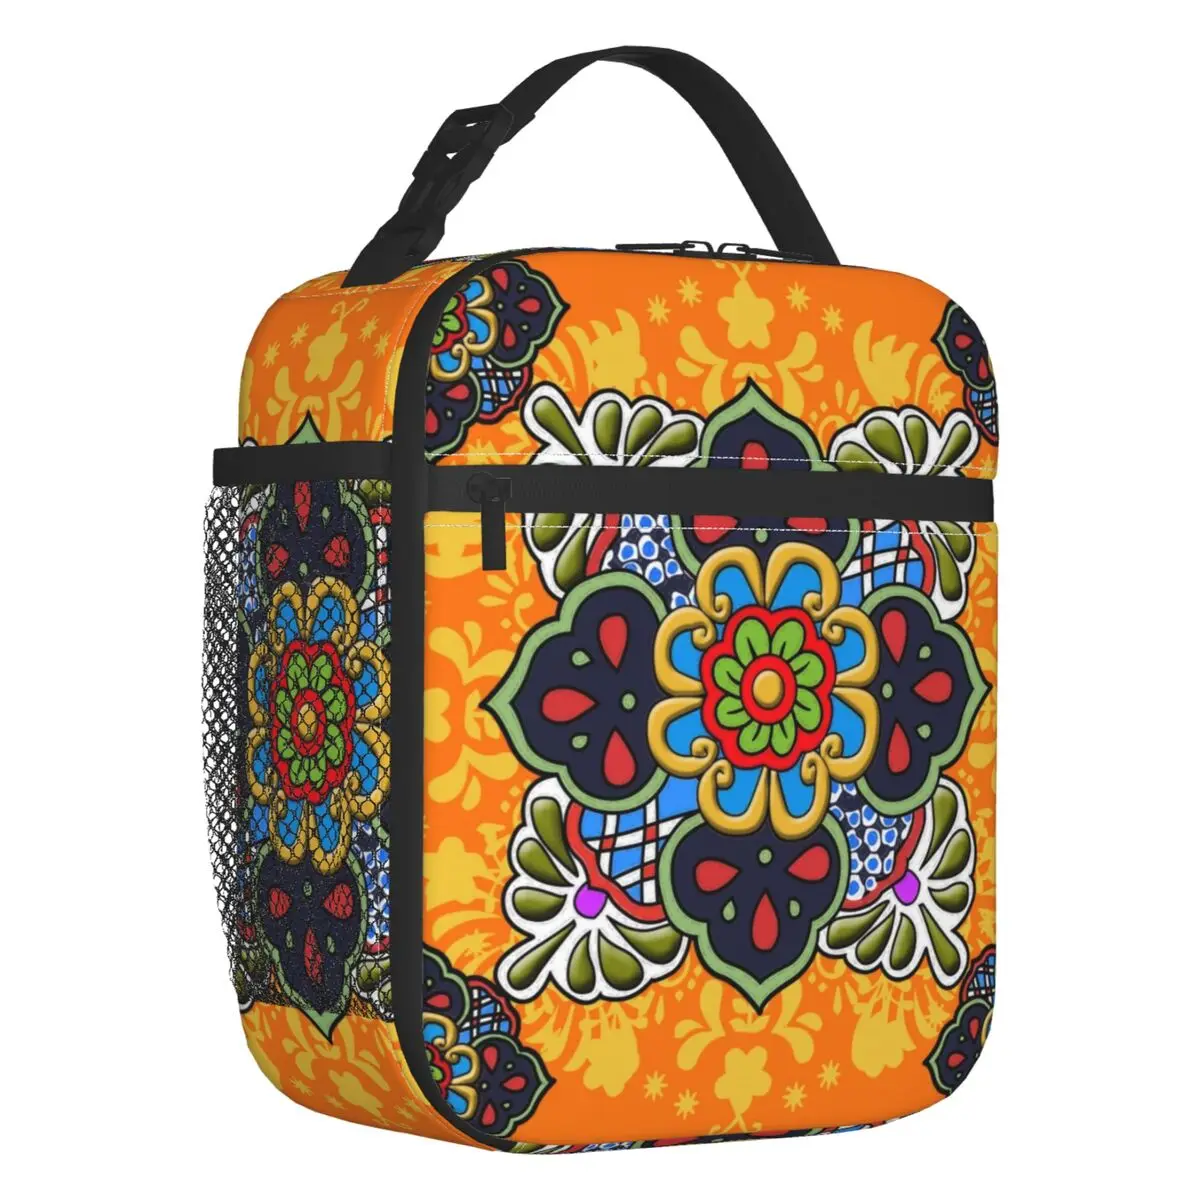 Mexican Talavera Flower Ceramic Tile Portable Lunch Boxes Women Waterproof Thermal Cooler Food Insulated Lunch Bag Kids School